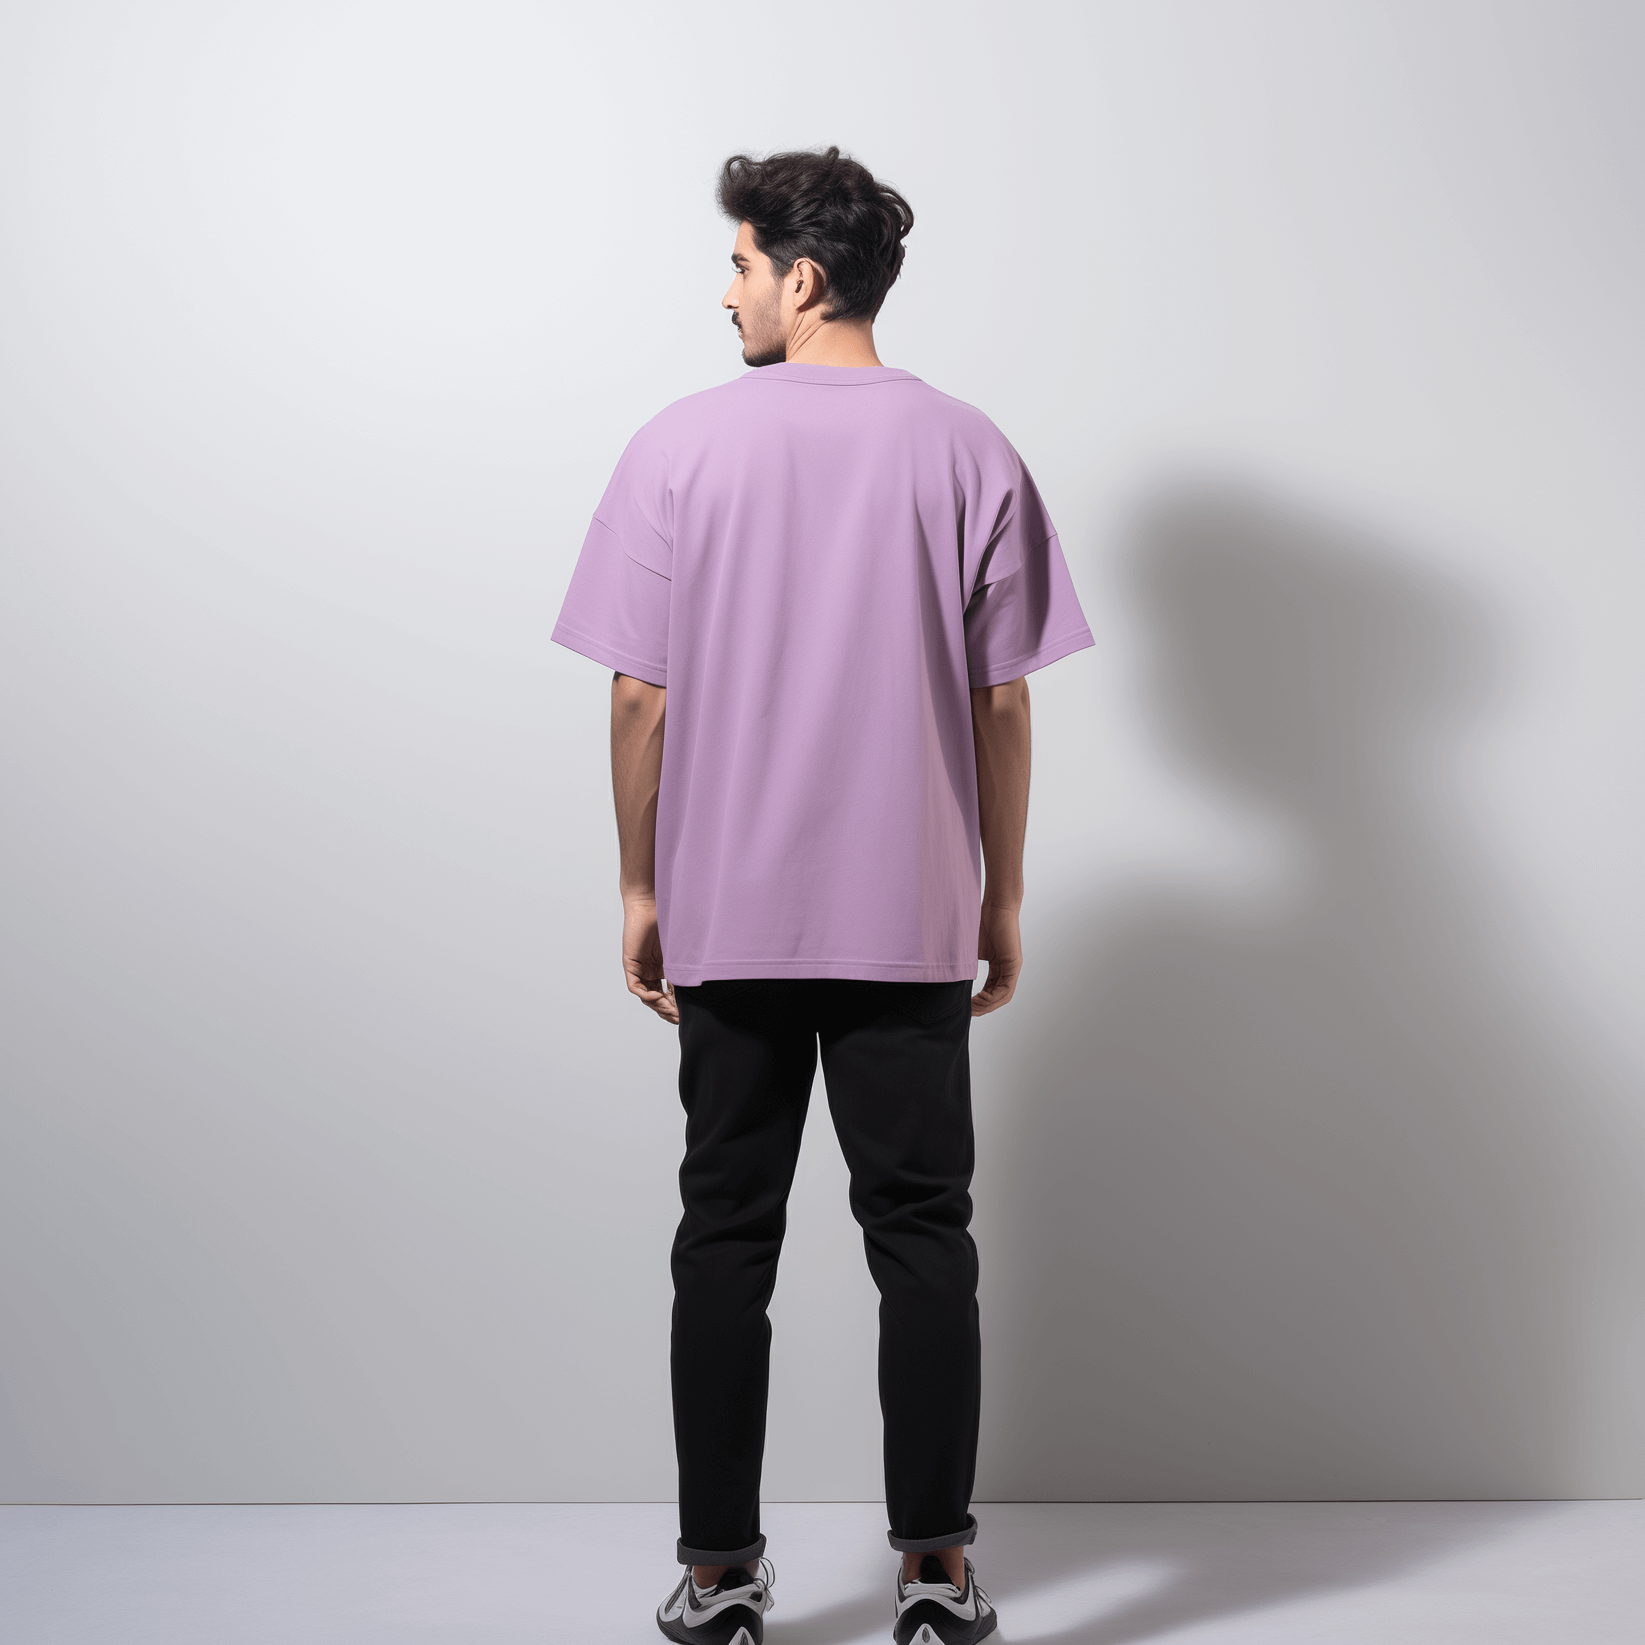 Solid Lavender Oversized Tshirt For Men and Women